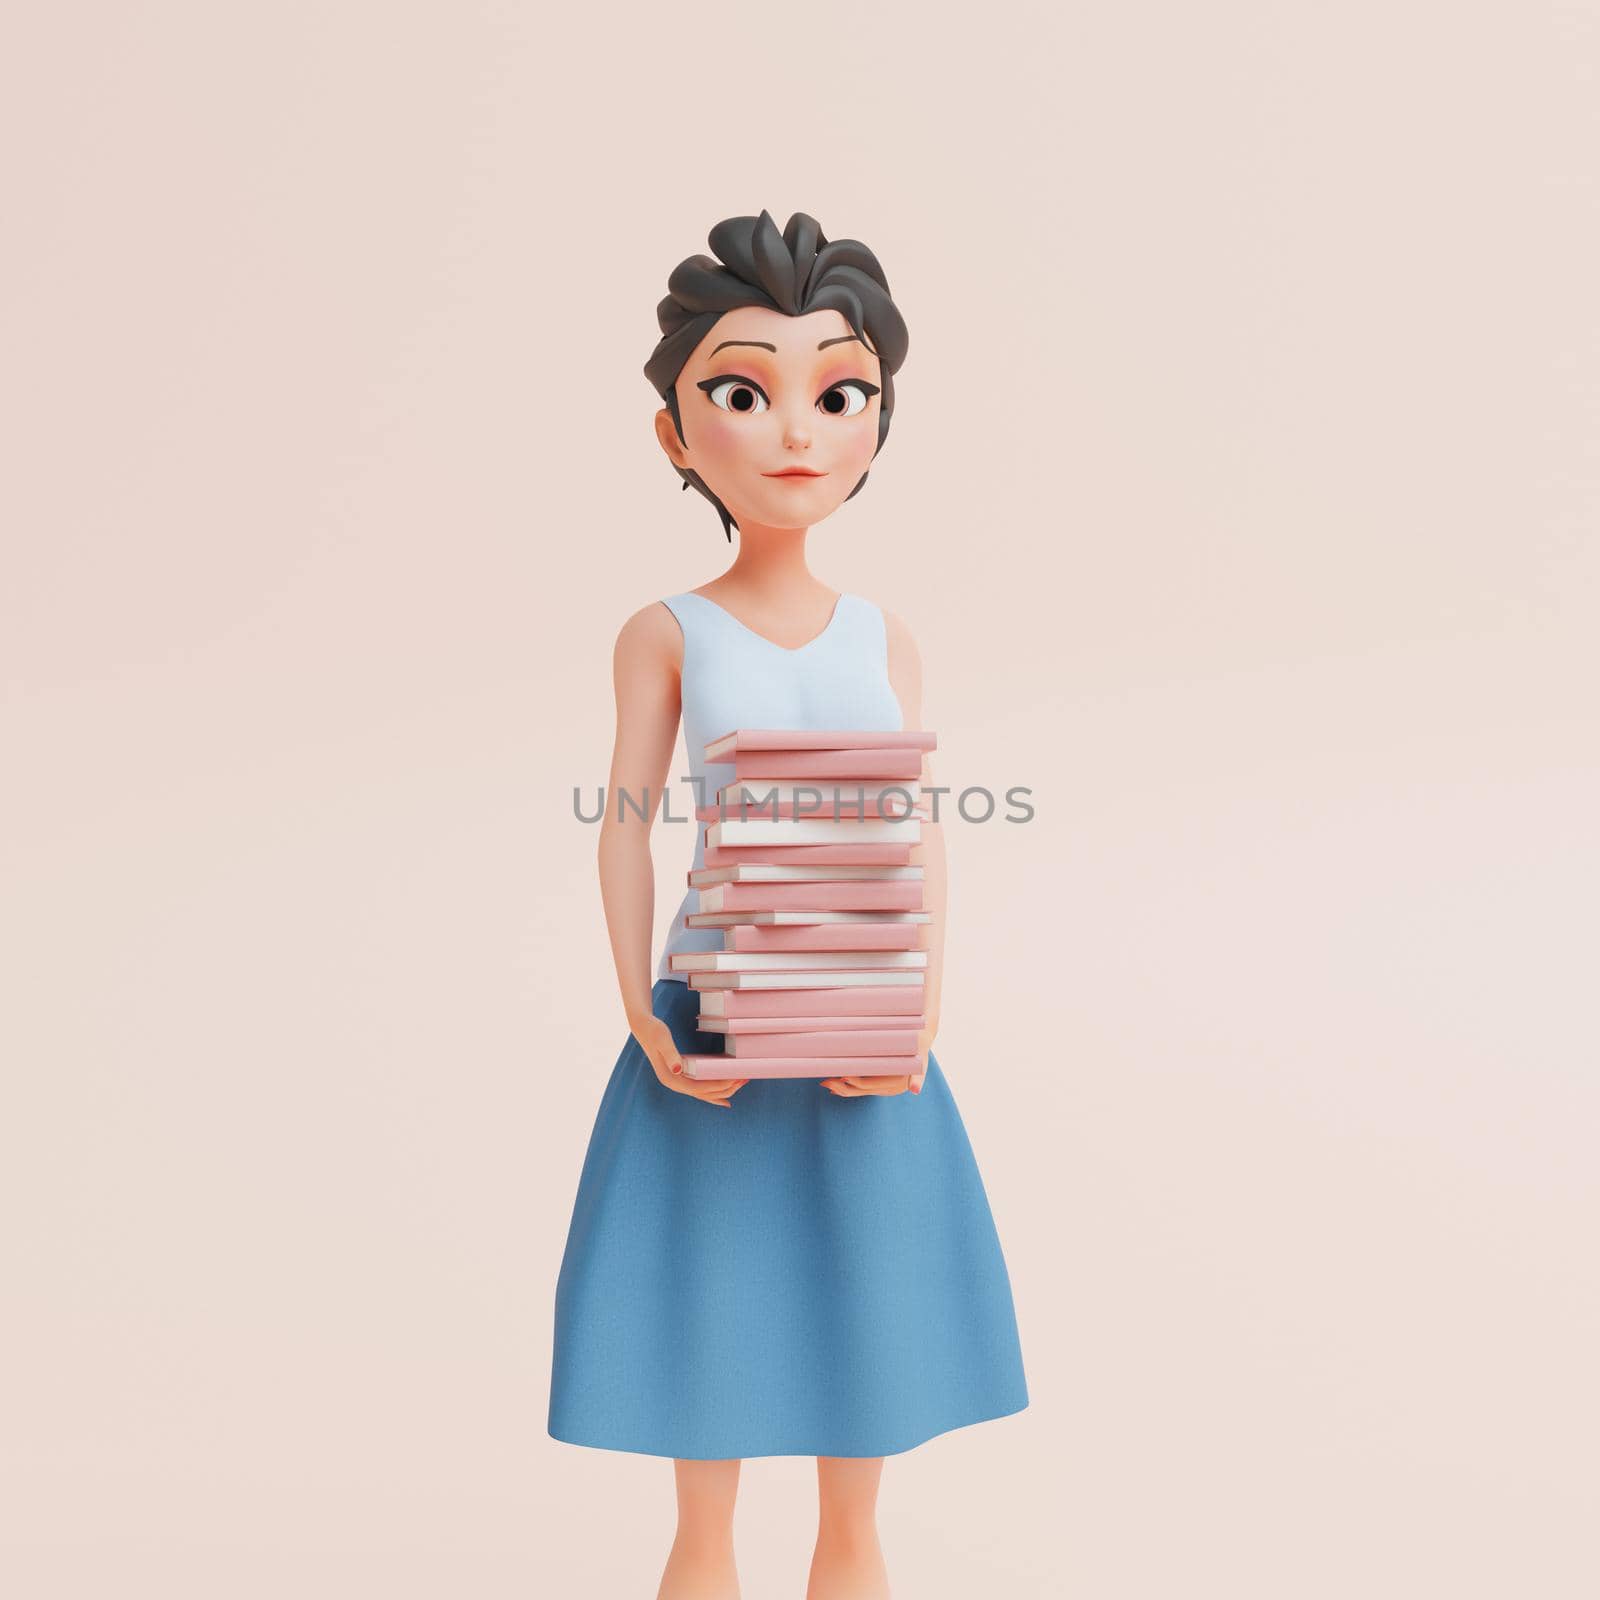 girl in dress holding many books in concept of education, back to school, reading and learning. 3d render of stylized character